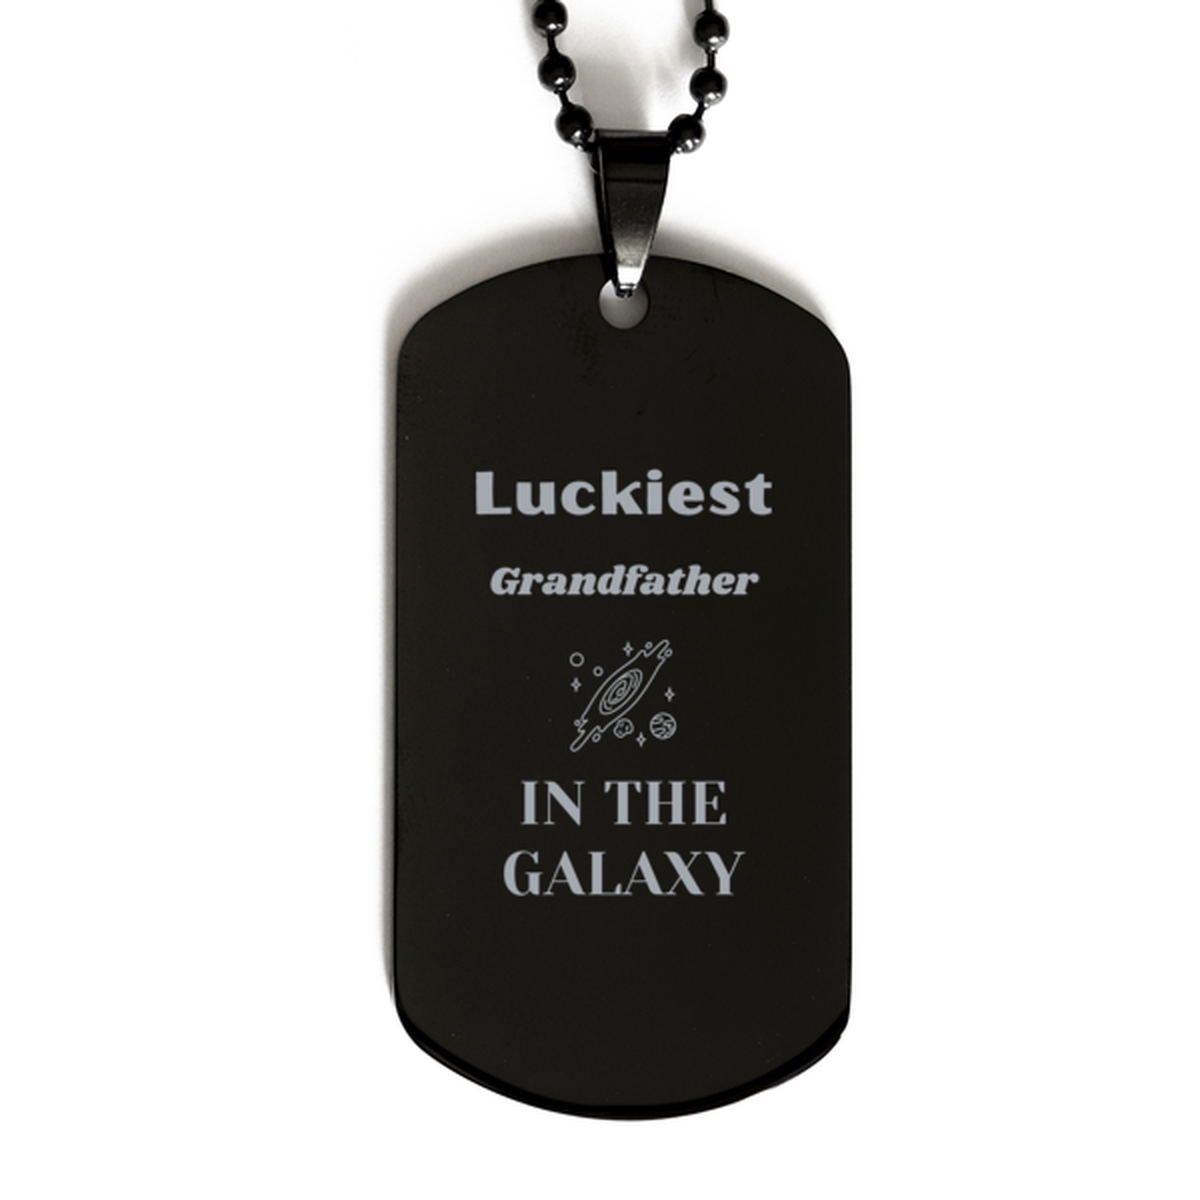 Luckiest Grandfather in the Galaxy, To My Grandfather Engraved Gifts, Christmas Grandfather Black Dog Tag Gifts, X-mas Birthday Unique Gifts For Grandfather Men Women